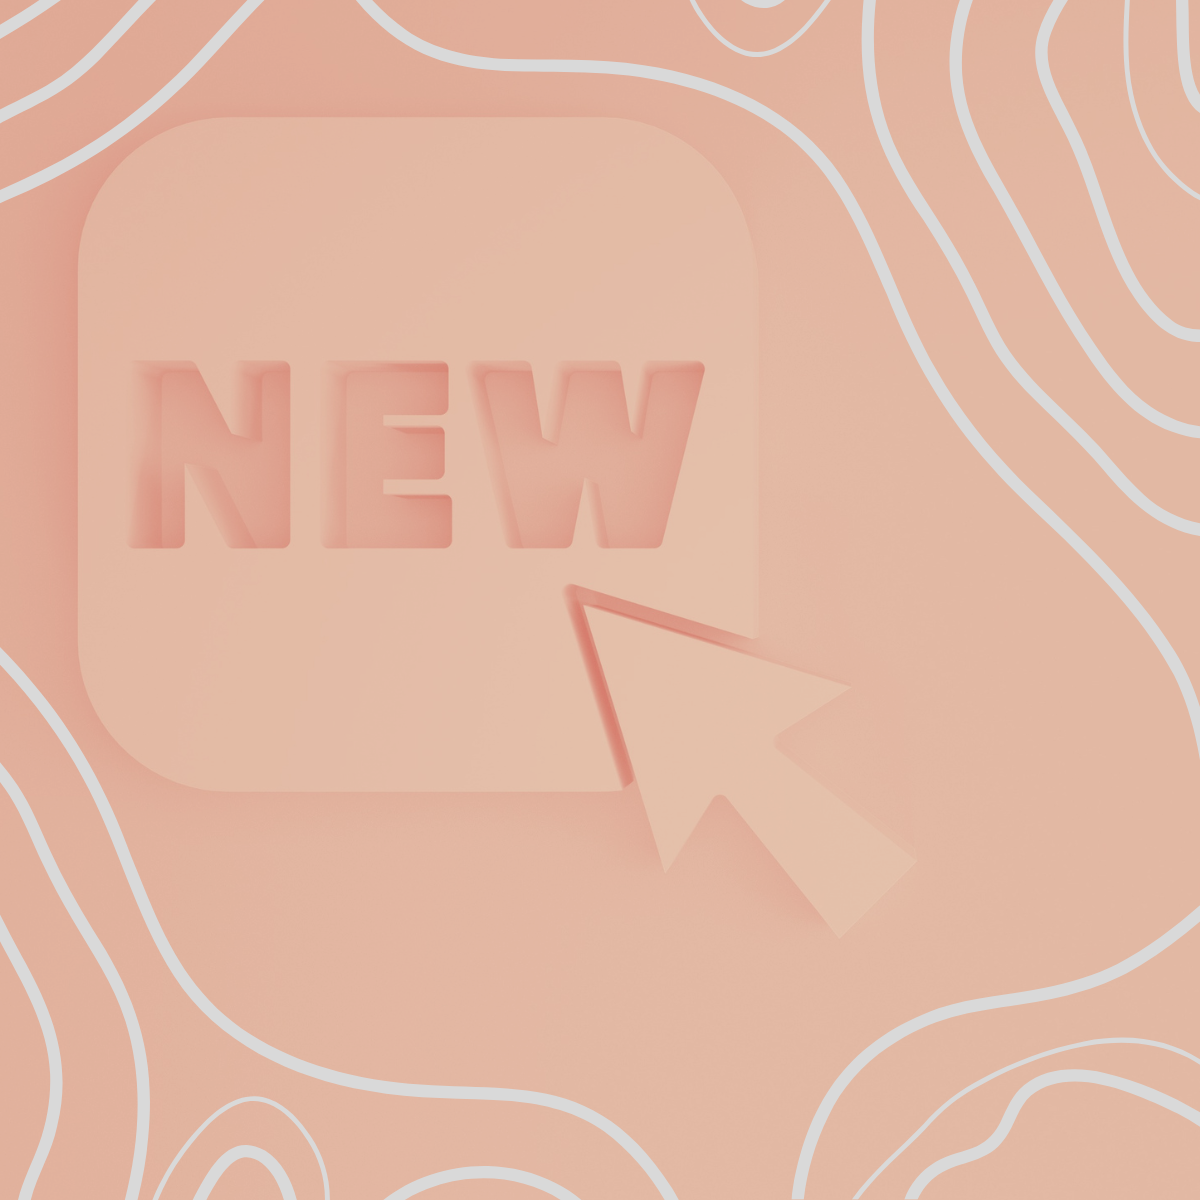 "NEW" with cursor arrow on pink background